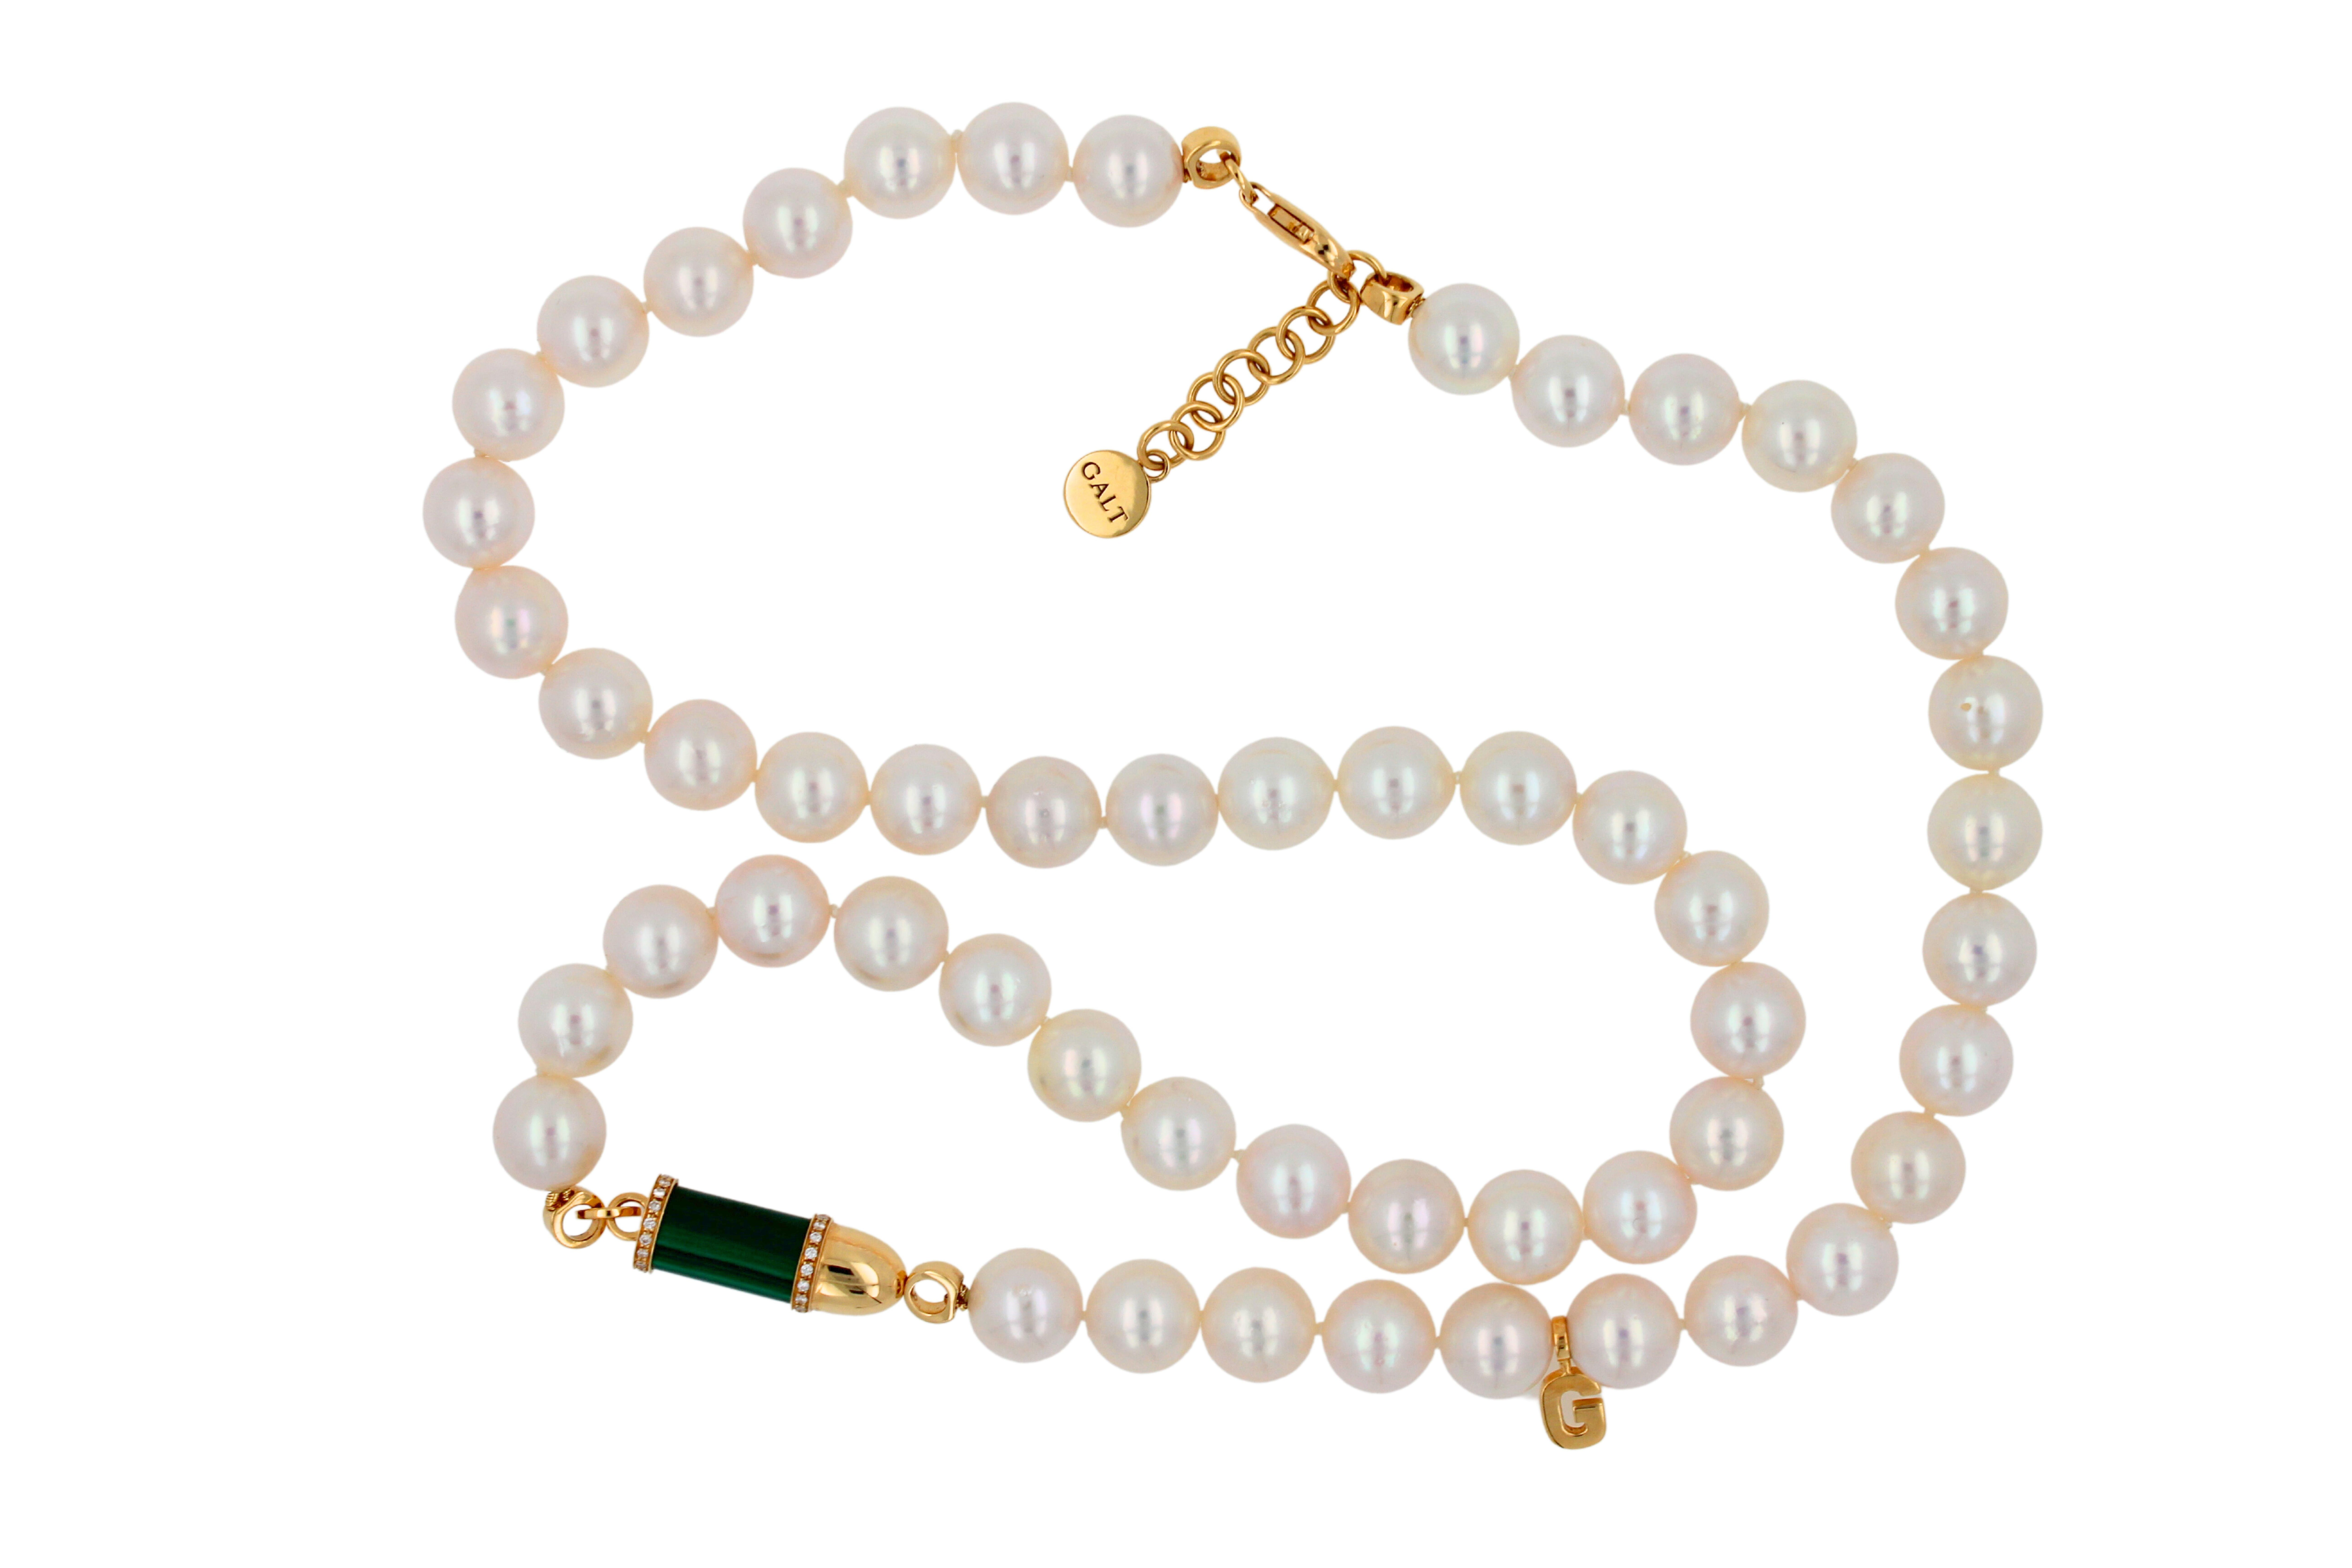 18K Yellow Gold Chains, Clasp, Bullet/Rocket, Letter (Solid Gold)
Green Malachite Cabochon Gemstone Rocket Bullet 
0.20 cts Diamonds 
South Sea Pearls with Amazing Luster, Color and Shine - White/Cream with Slightly Rose Hue & Overtones 
8-9mm Size